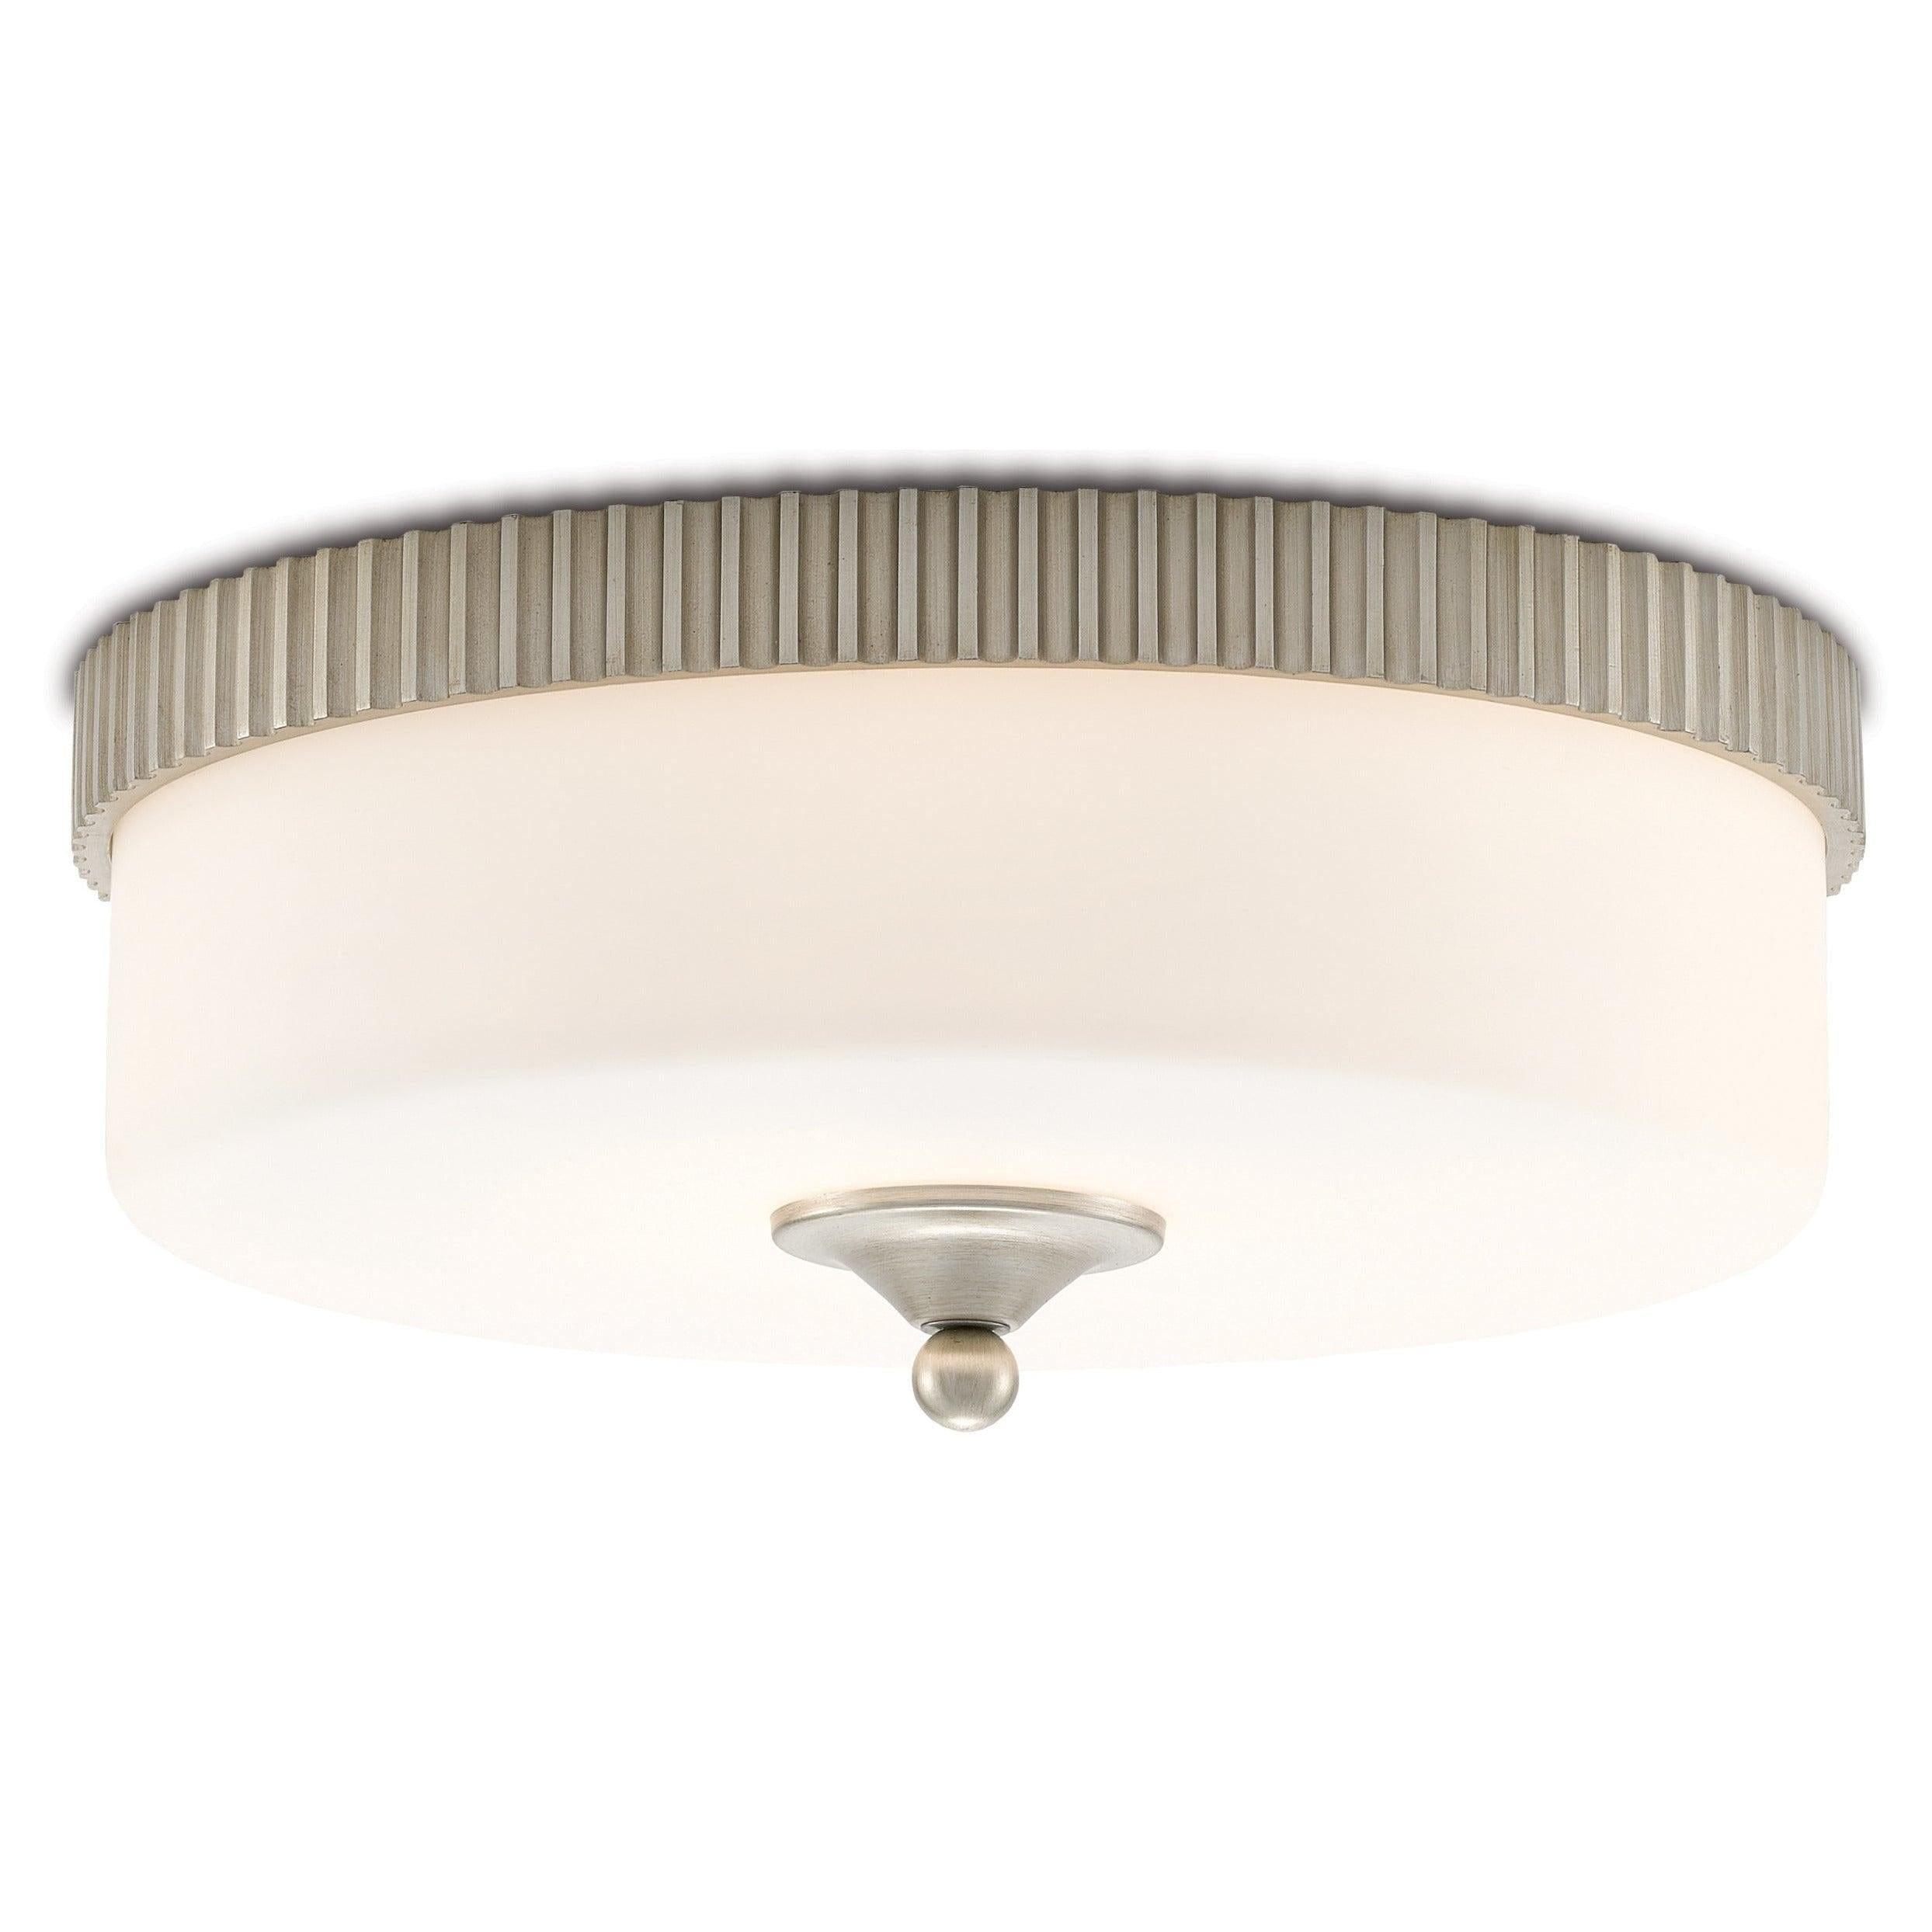 Currey and Company - Bryce Flush Mount - 9999-0052 | Montreal Lighting & Hardware